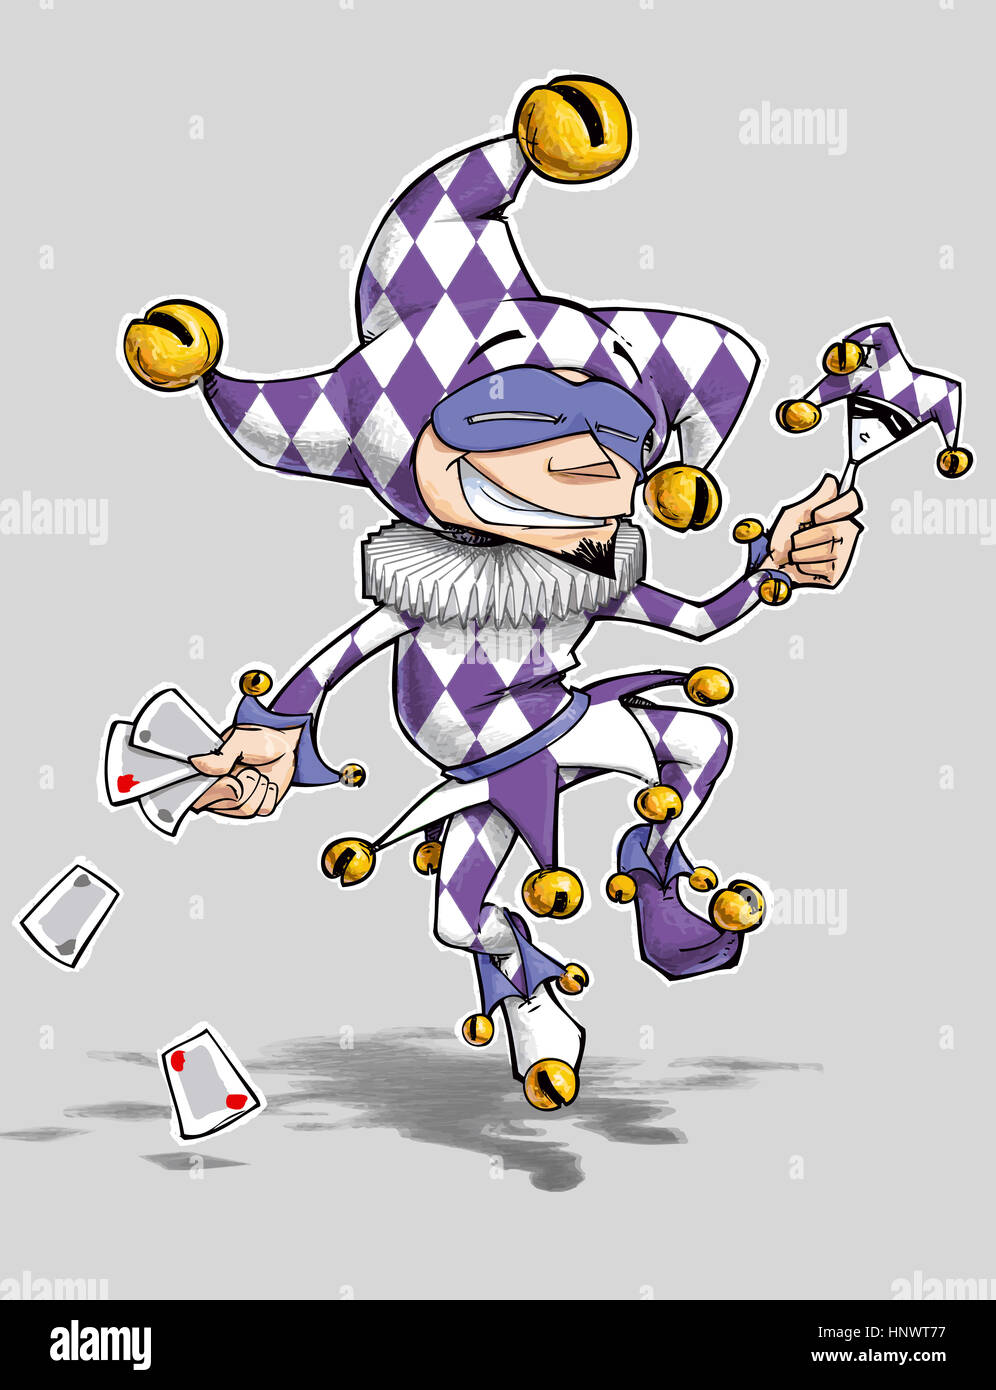 Cartoon illustration of a dancing jester in purple and white diamond outfit.  Enjoy!!! Stock Photo